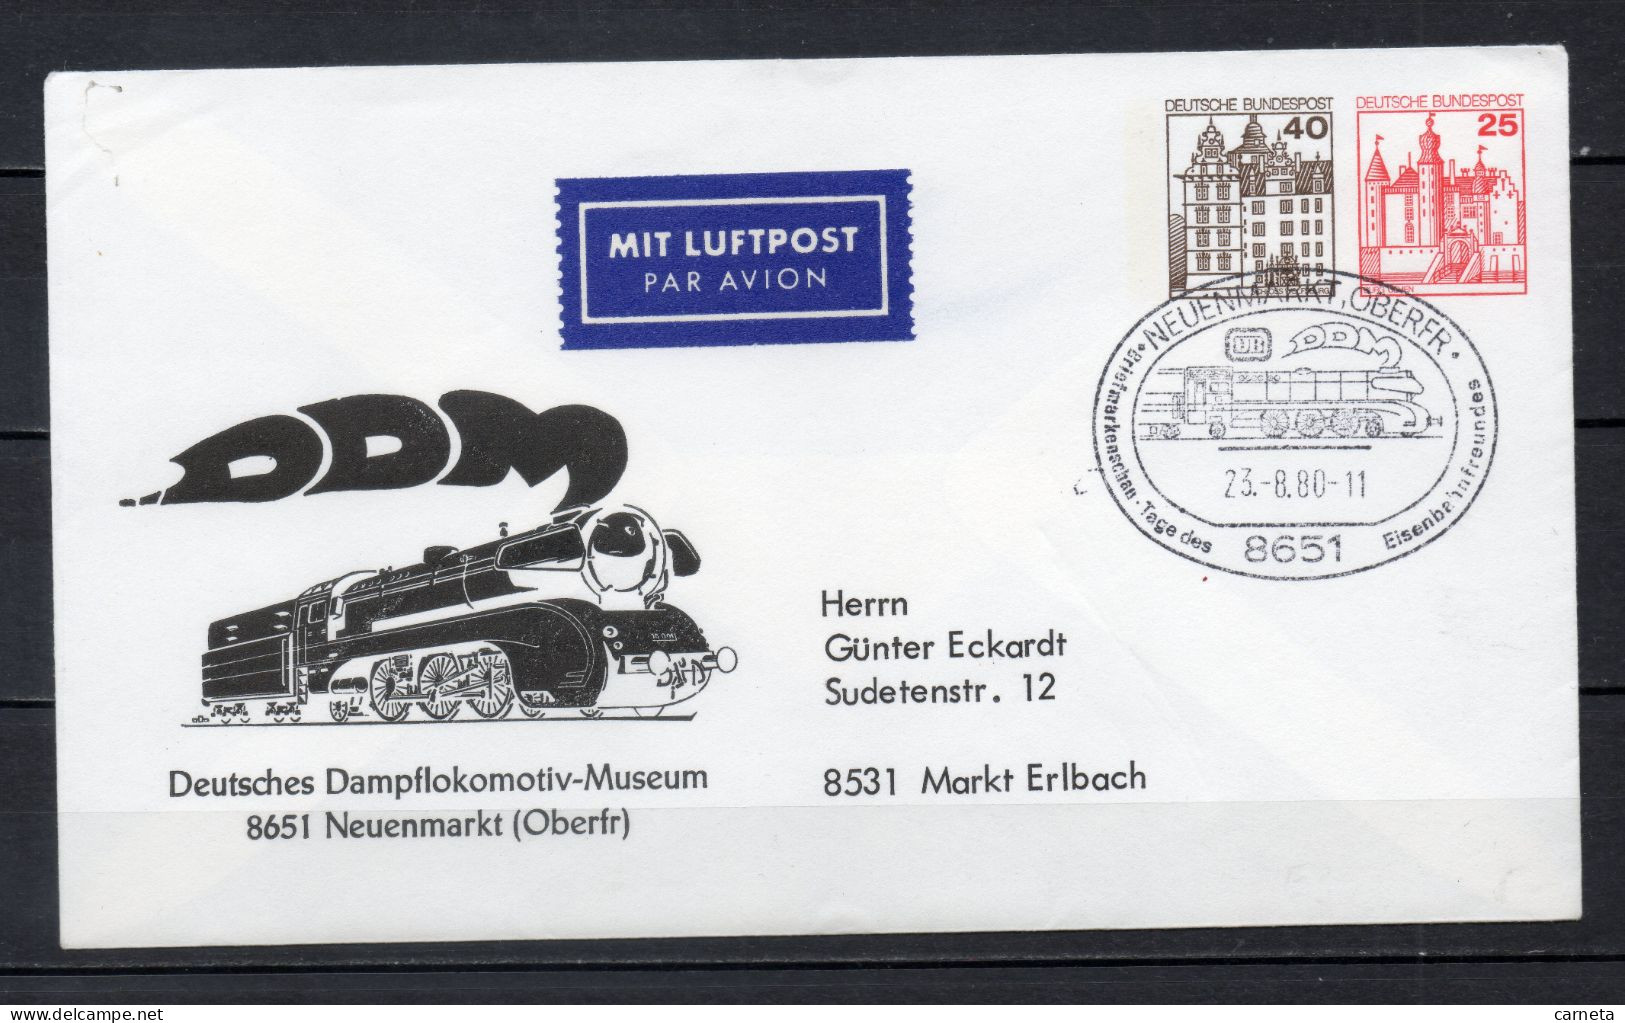 ALLEMAGNE FEDERALE ENTIER POSTAL  N° 834 + 876  SUR ENVELOPPE    COTE  ? €    TRAIN - Private Covers - Used